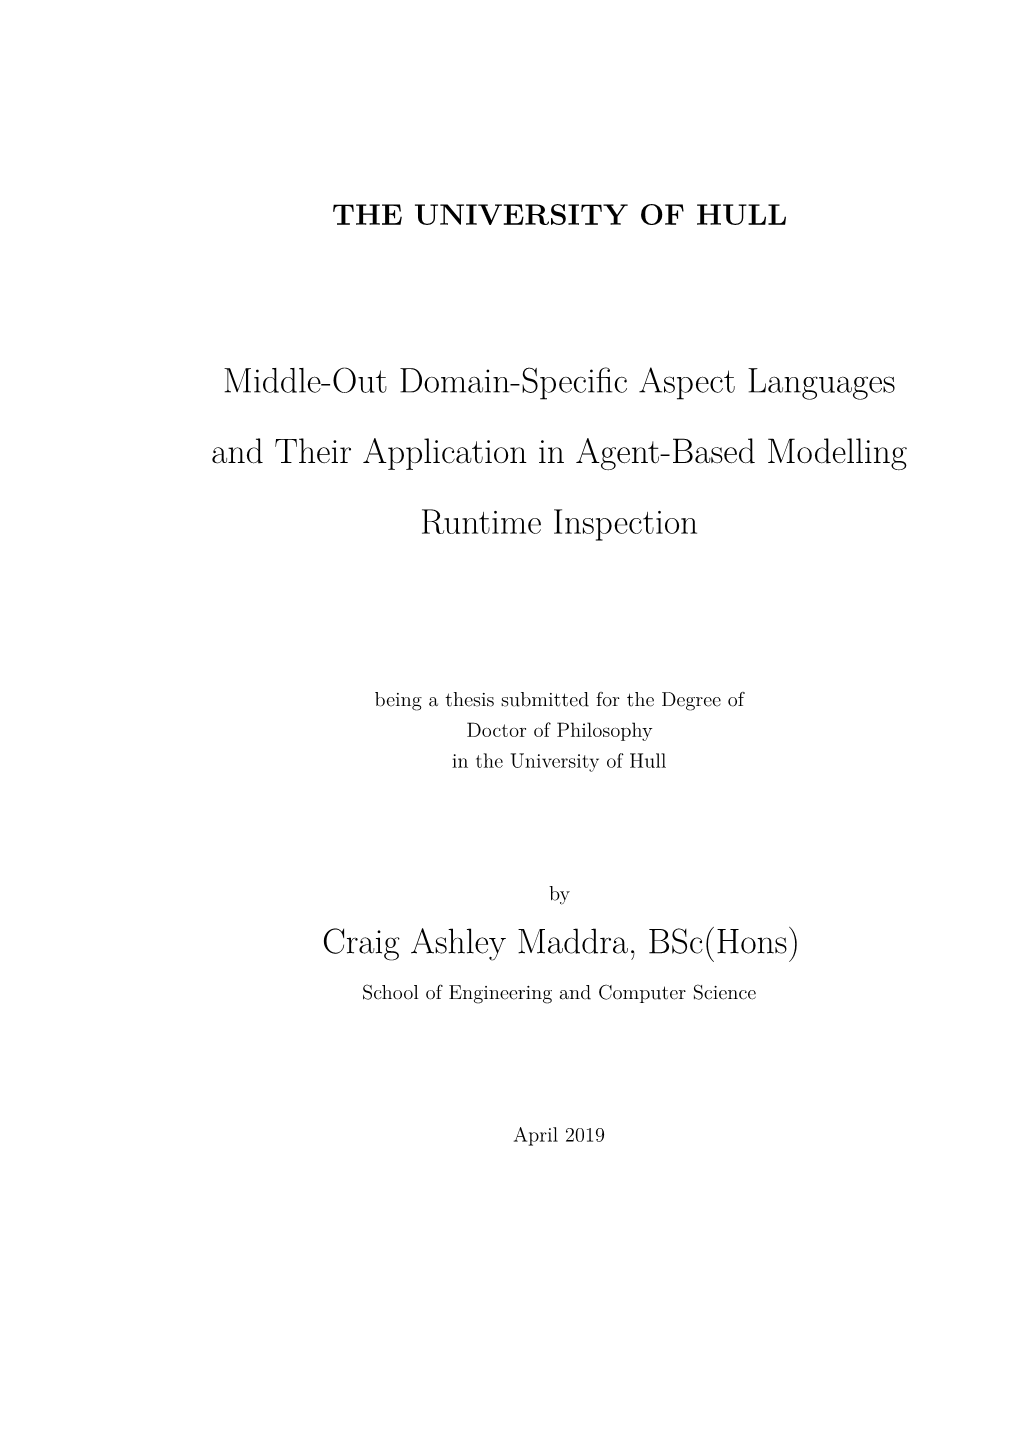 Middle-Out Domain-Specific Aspect Languages And